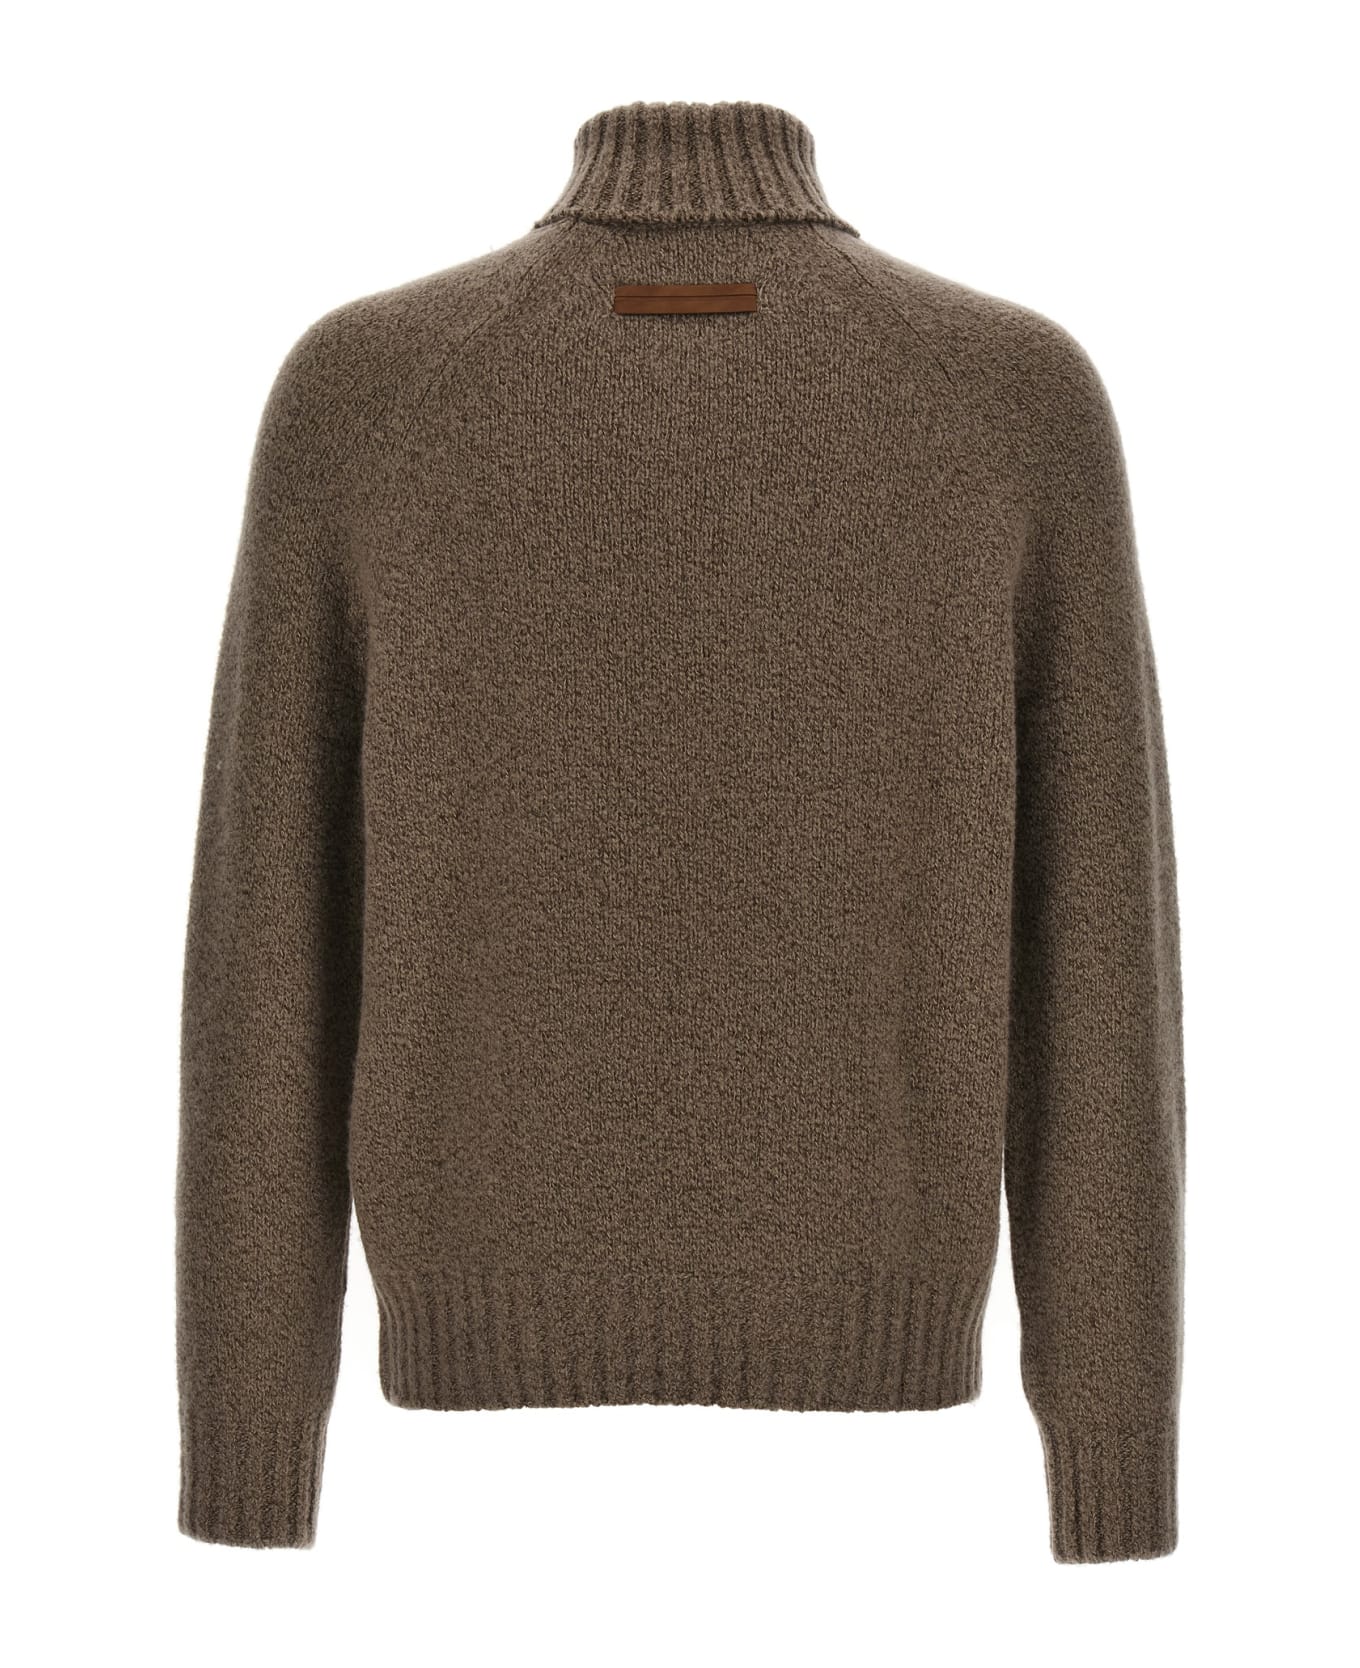 Zegna Boucle Silk Cashmere Sweater - BROWN ニットウェア